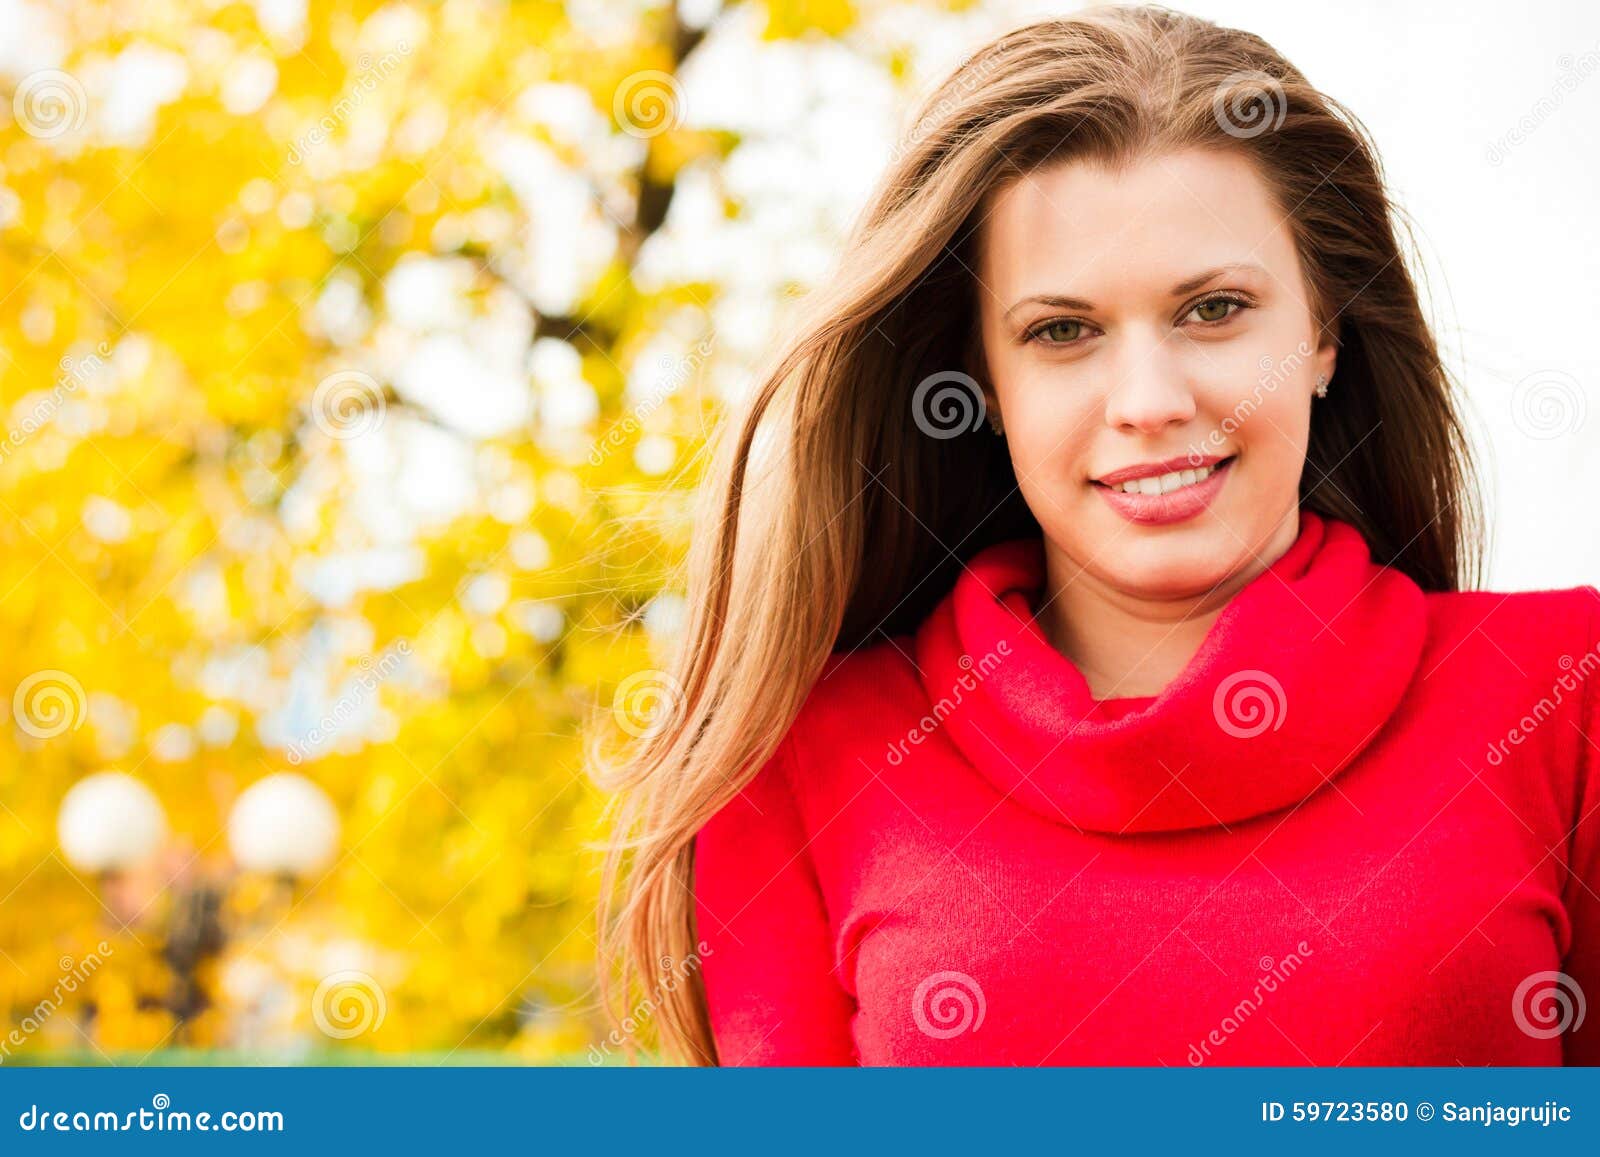 Autumn Girl Portrait. Enjoying in a Sunny Day Stock Photo - Image of ...